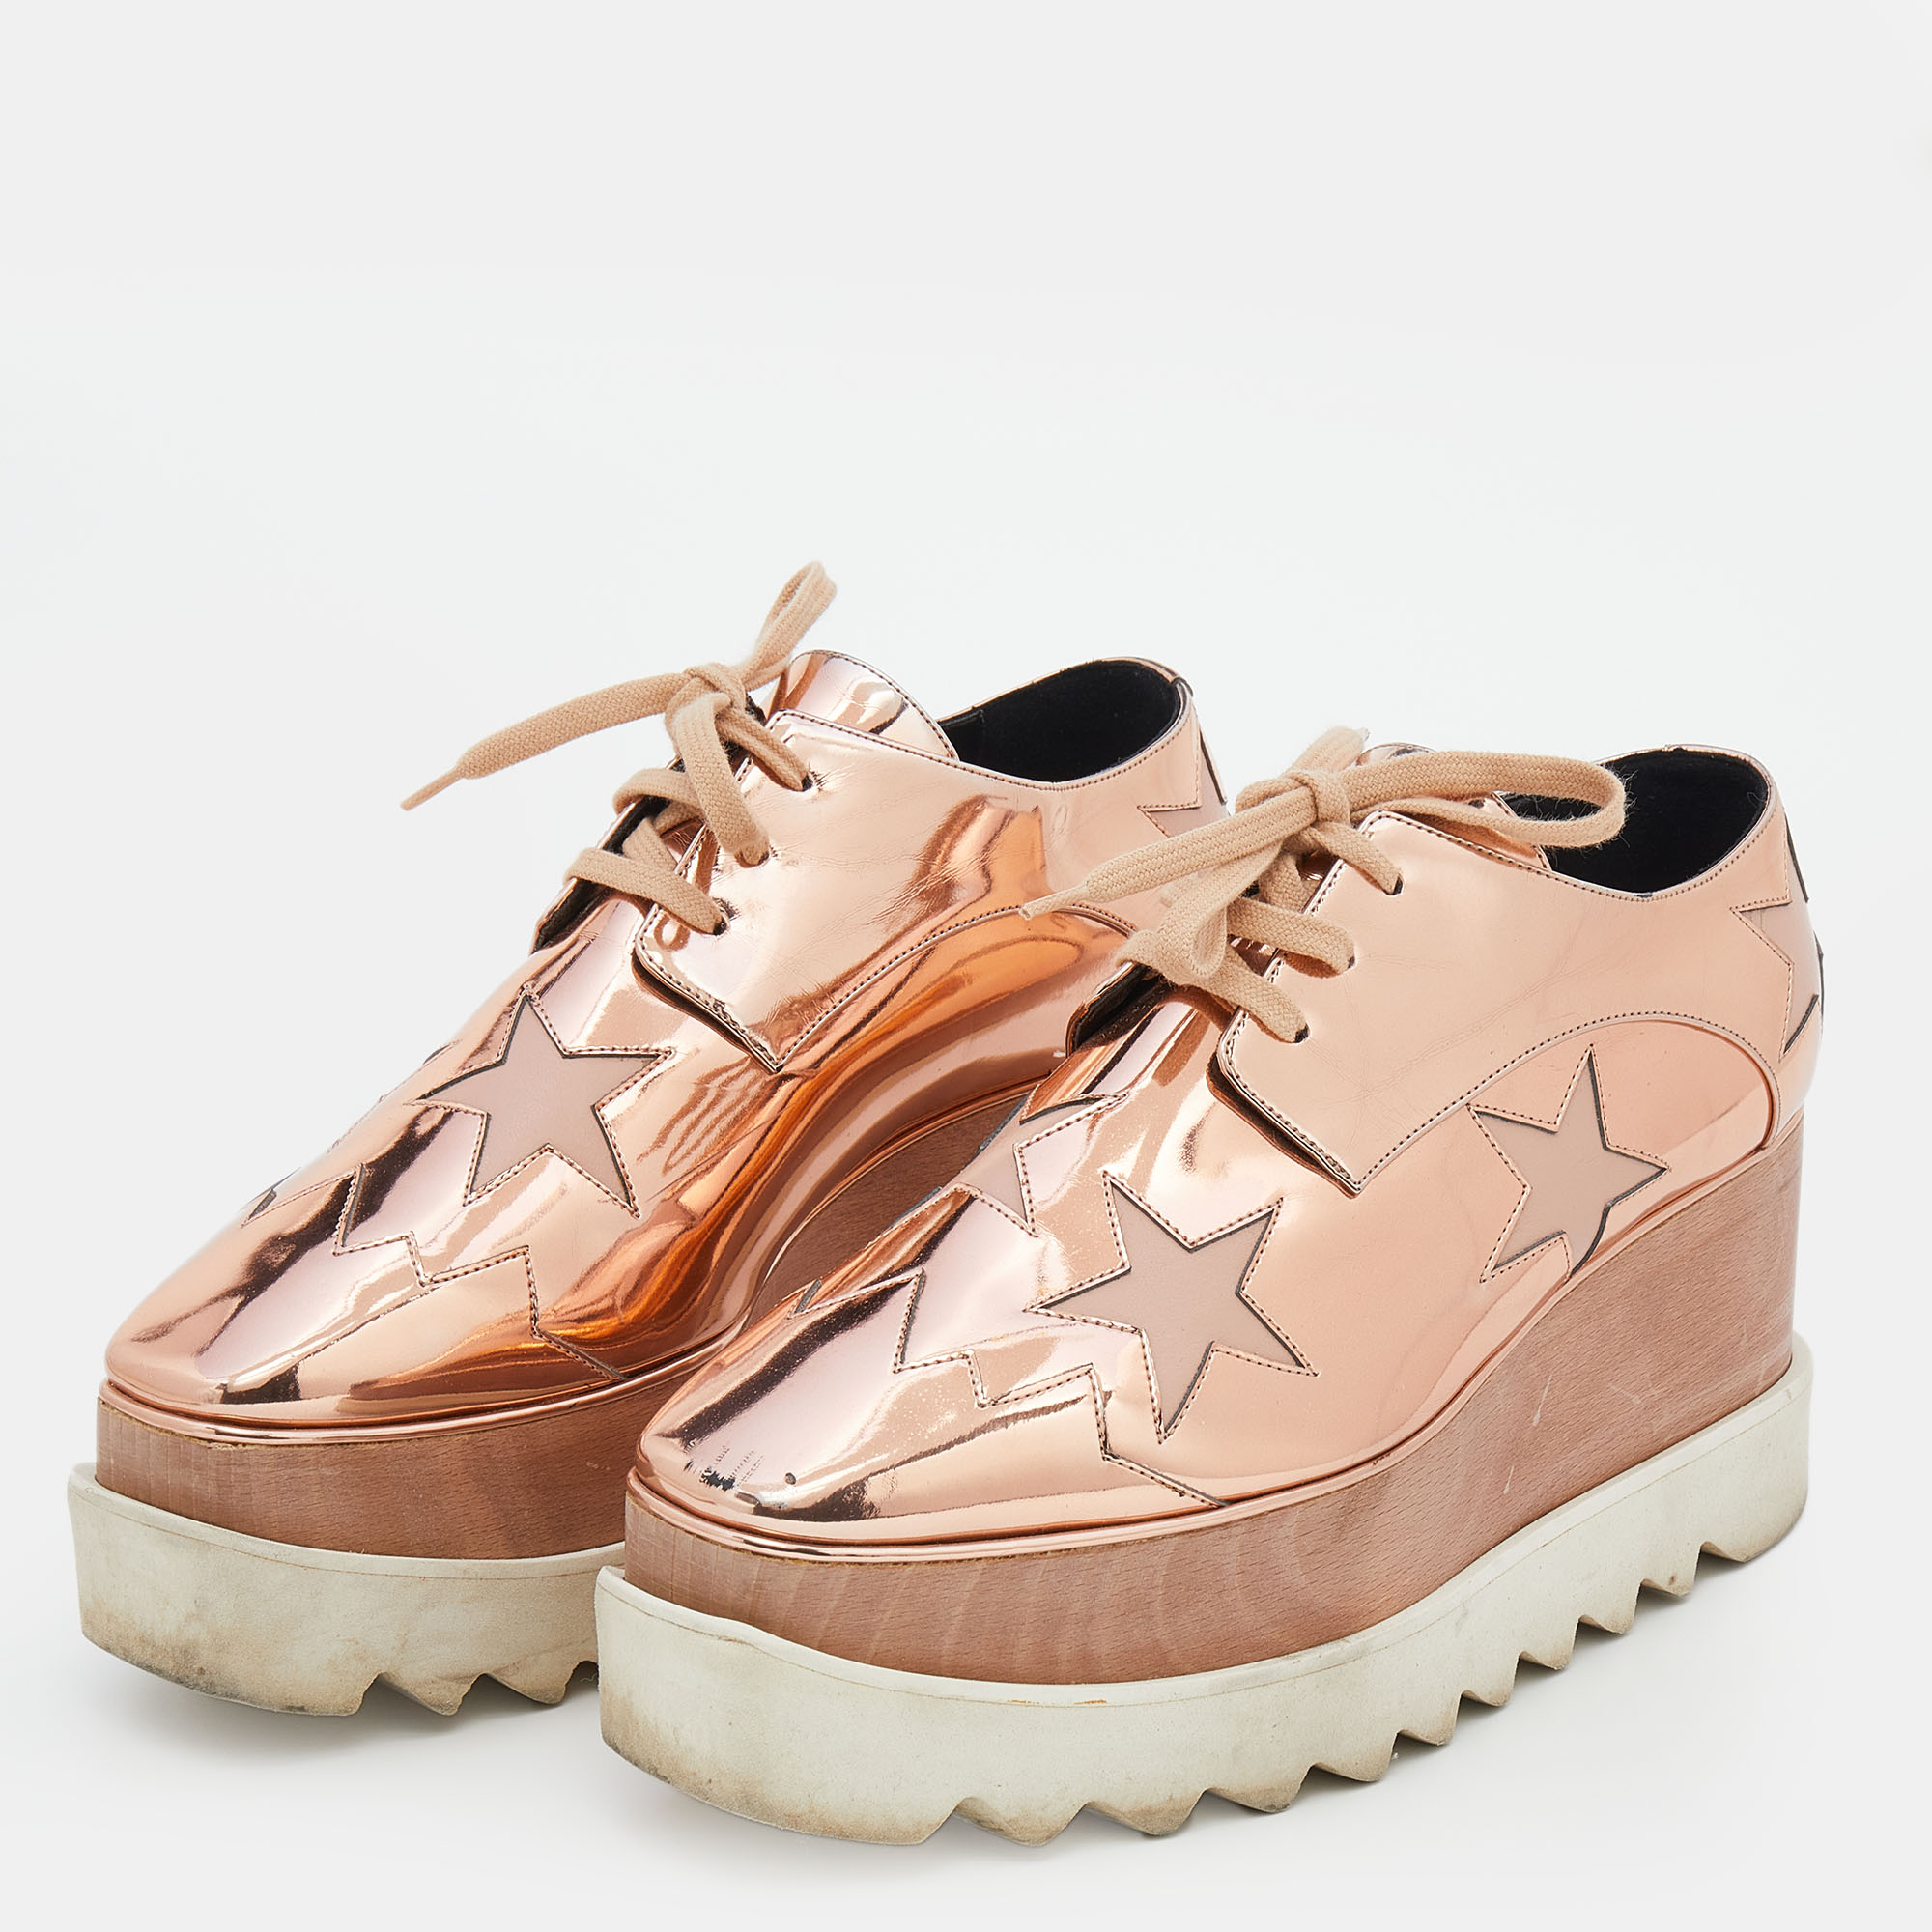 

Stella McCartney Metallic Rose Gold Faux Patent Leather Elyse Star Platform Lace Up Sneakers Size